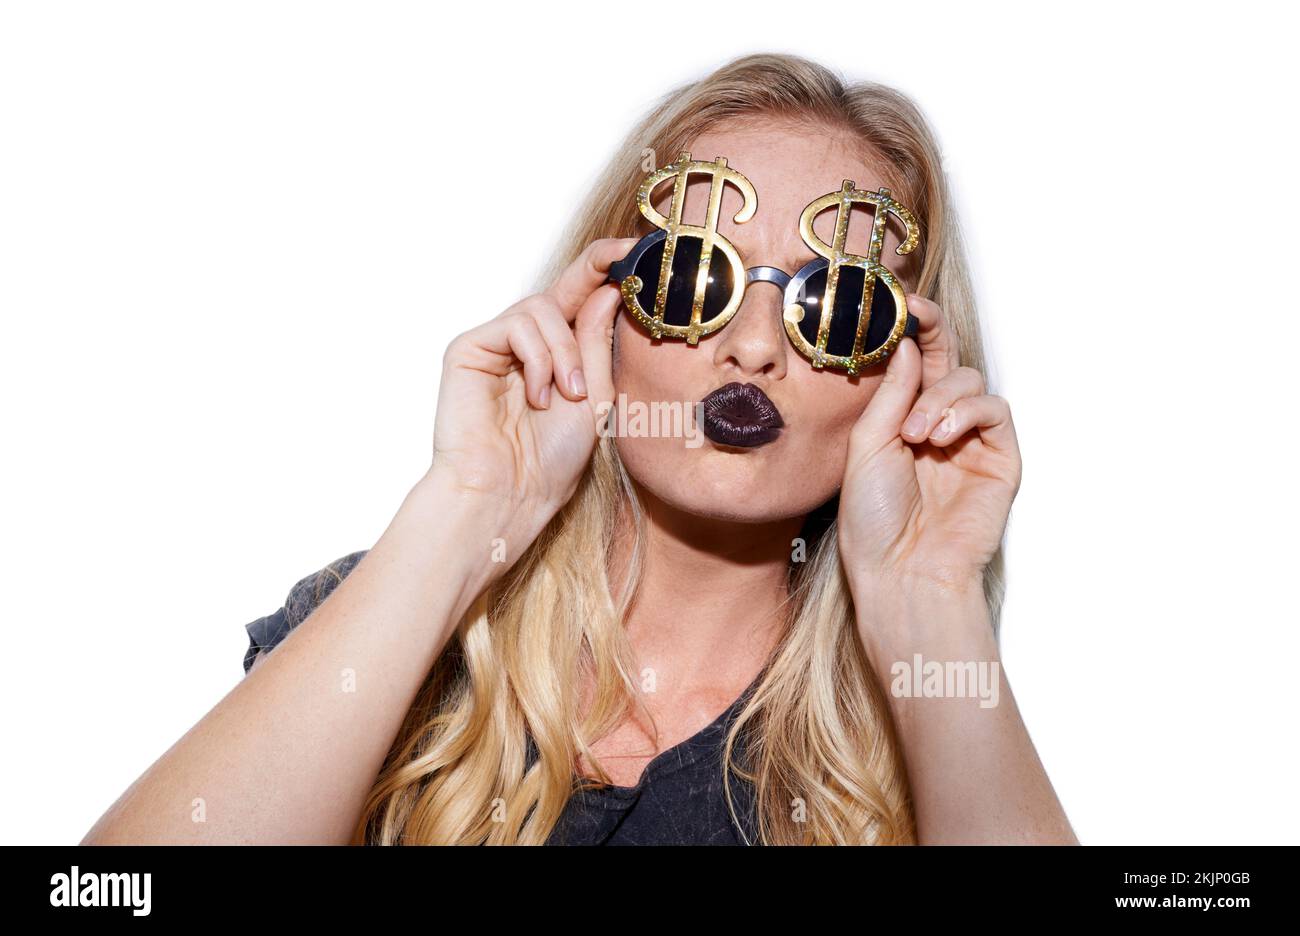 Bling bling. an unconventional blonde woman wearing bling sunglasses. Stock Photo